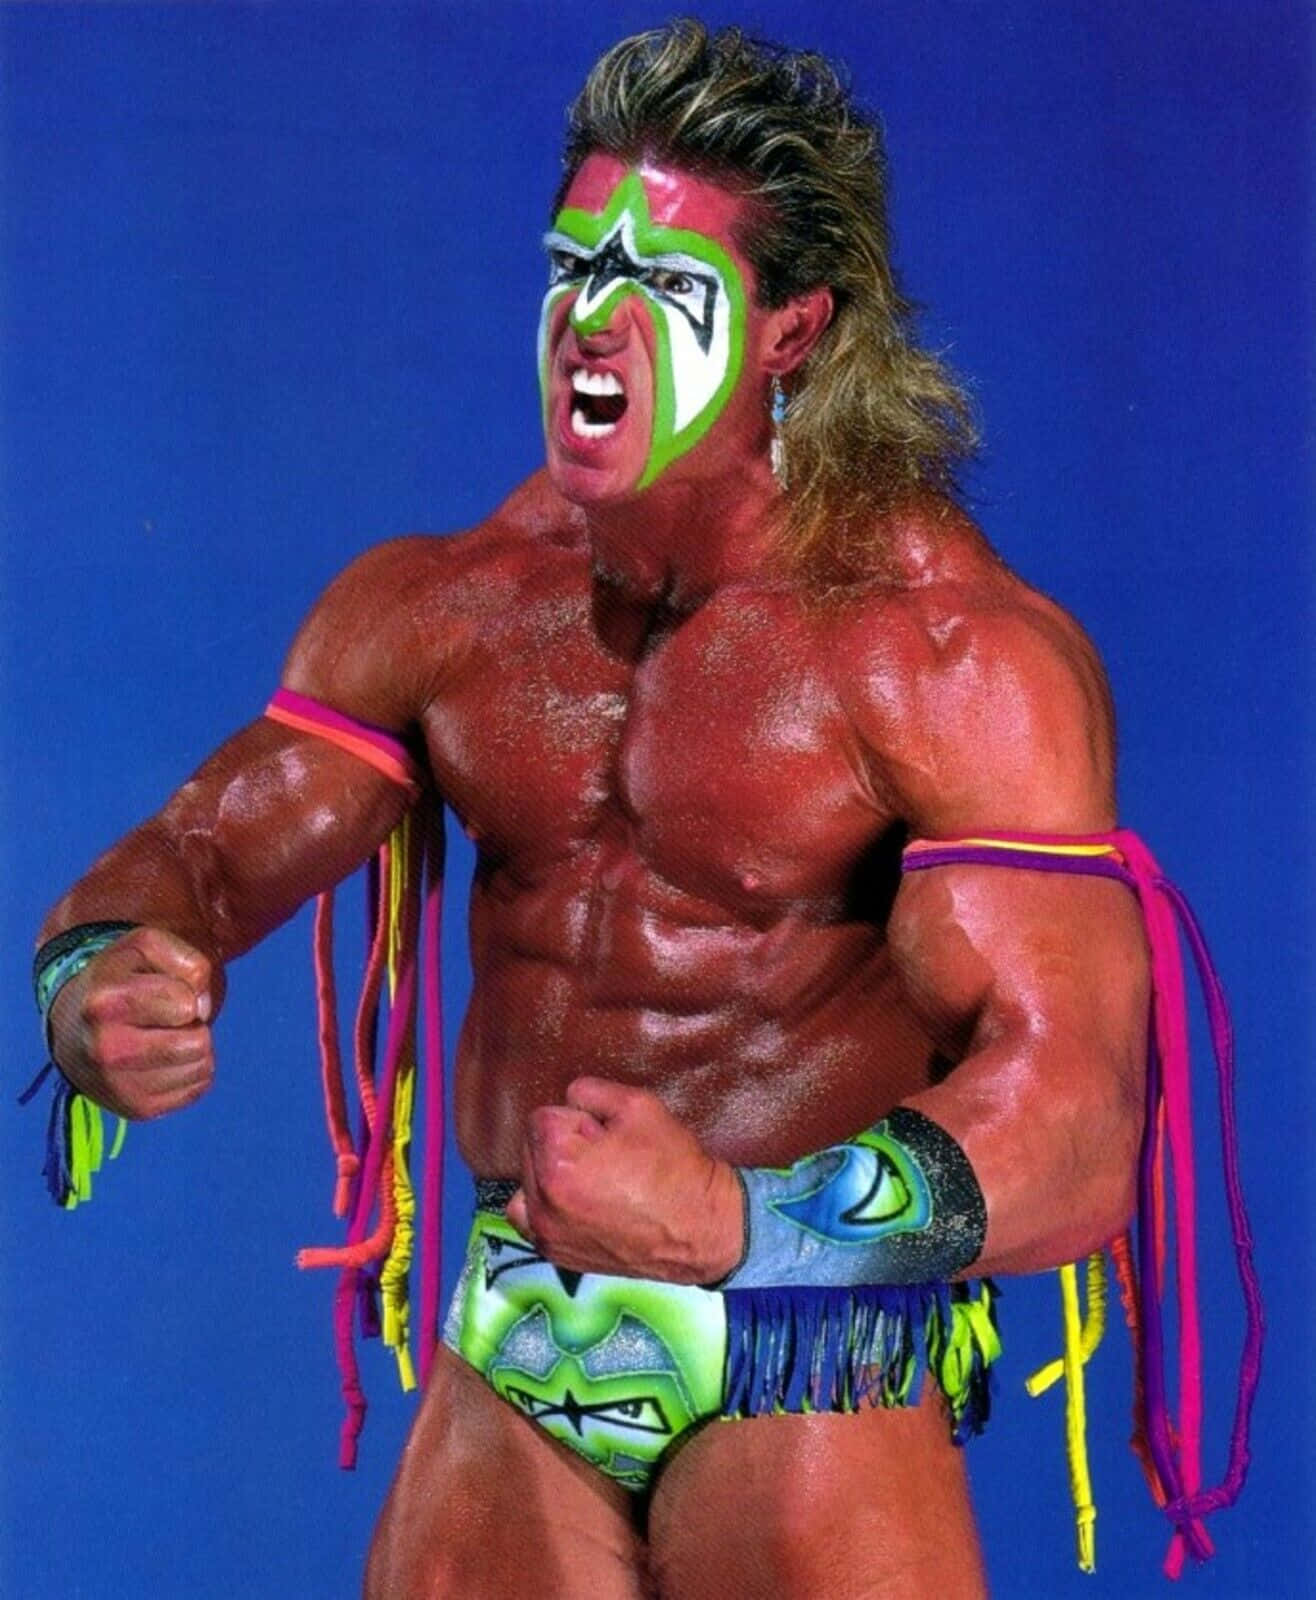 Wwe Legend - The Ultimate Warrior In His Iconic Neon Costume